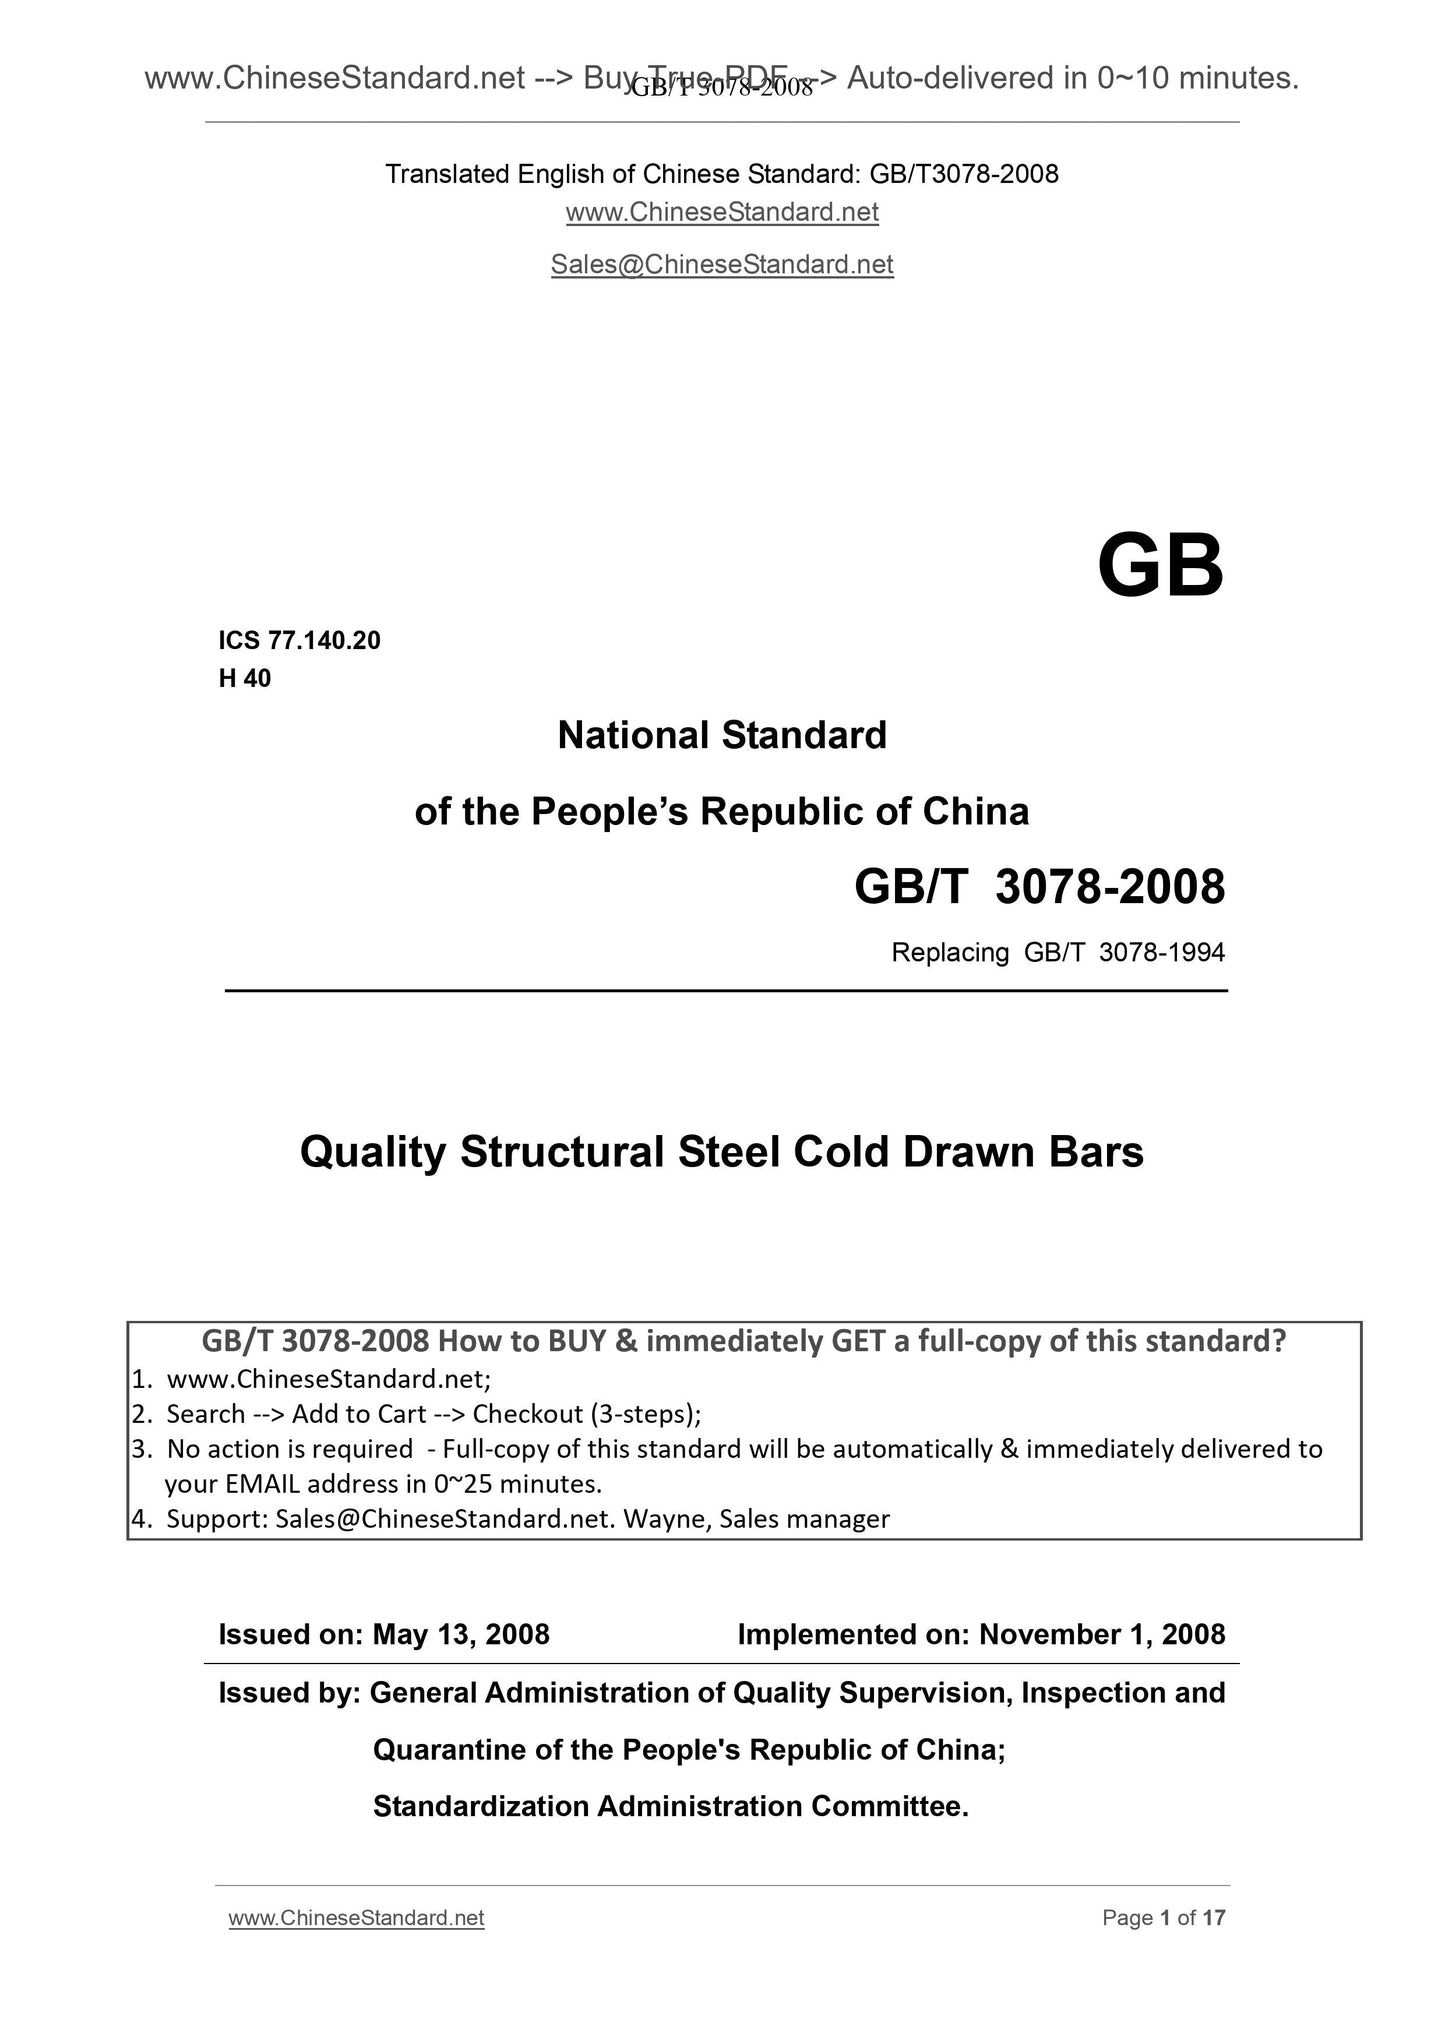 GB/T 3078-2008 Page 1